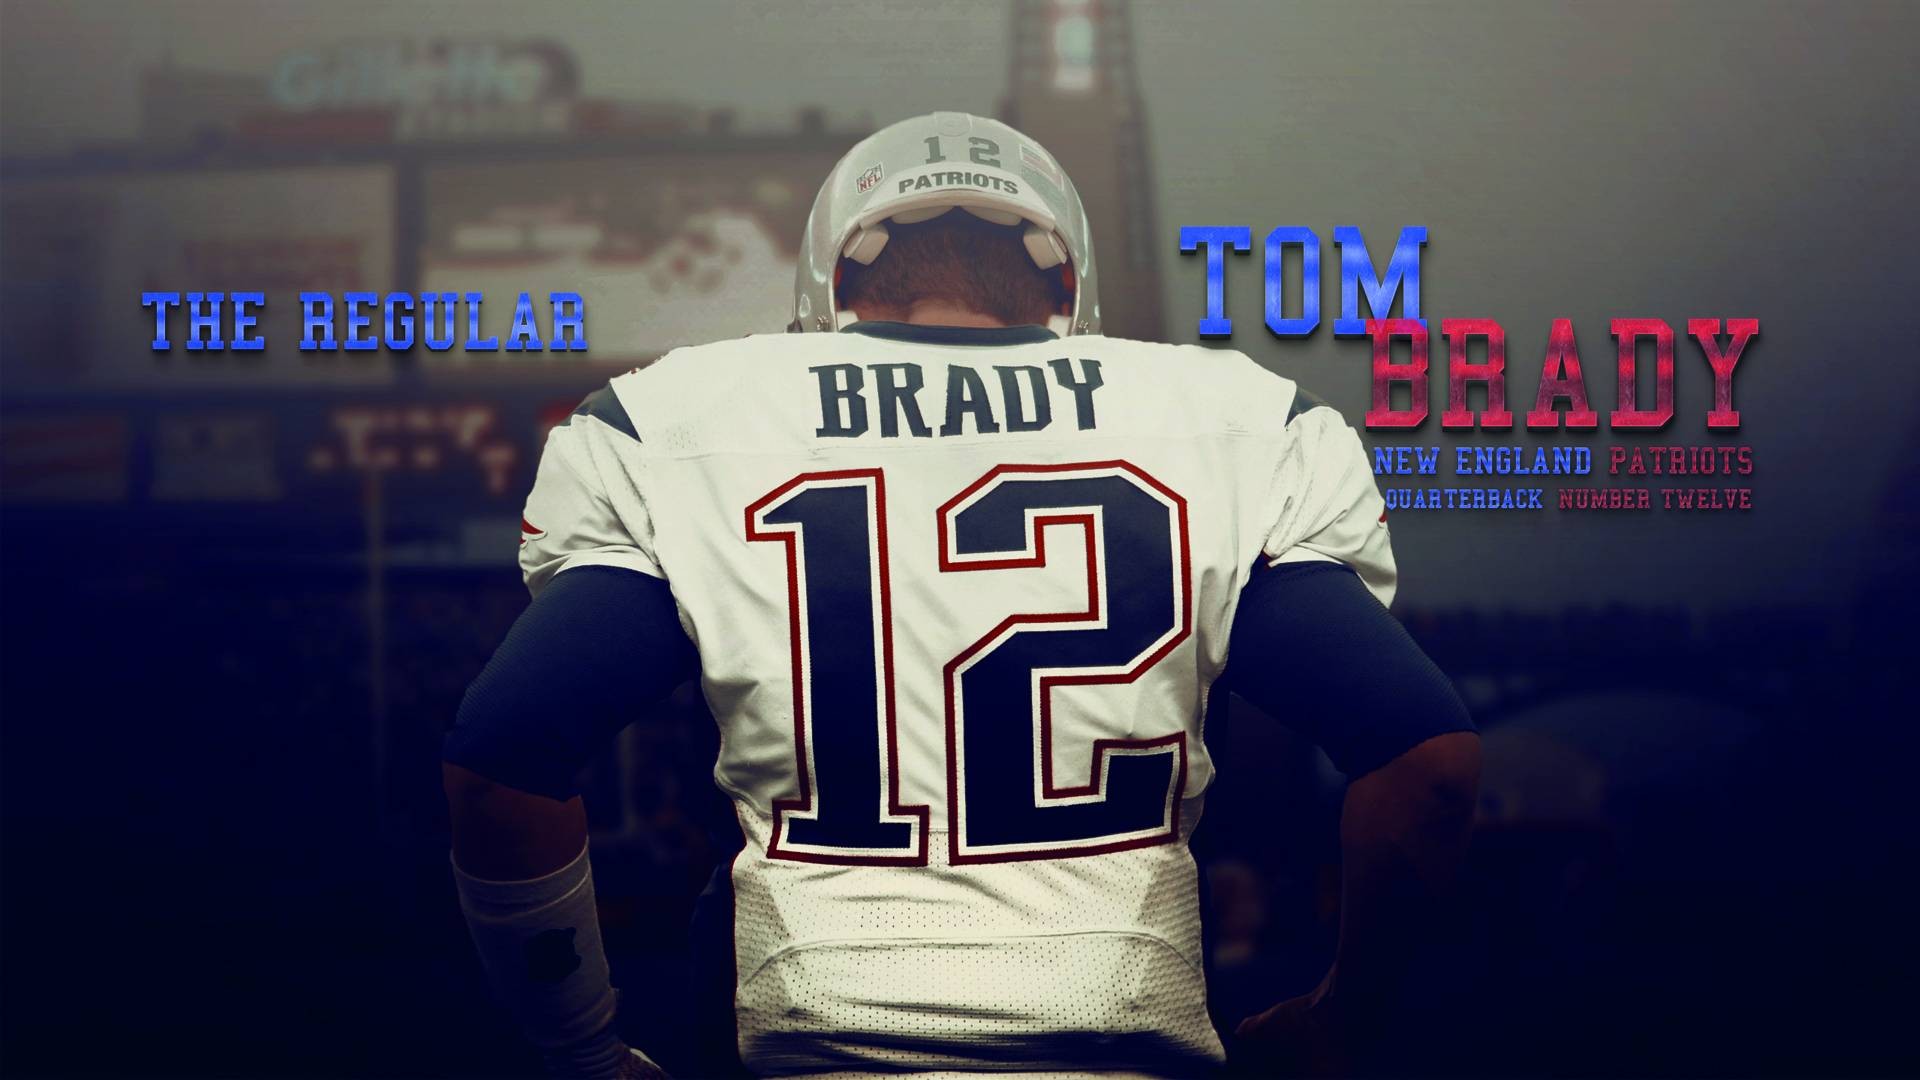 Wallpaper Tom Brady HD with image resolution 1920x1080 pixel. You can make this wallpaper for your Desktop Computer Backgrounds, Mac Wallpapers, Android Lock screen or iPhone Screensavers